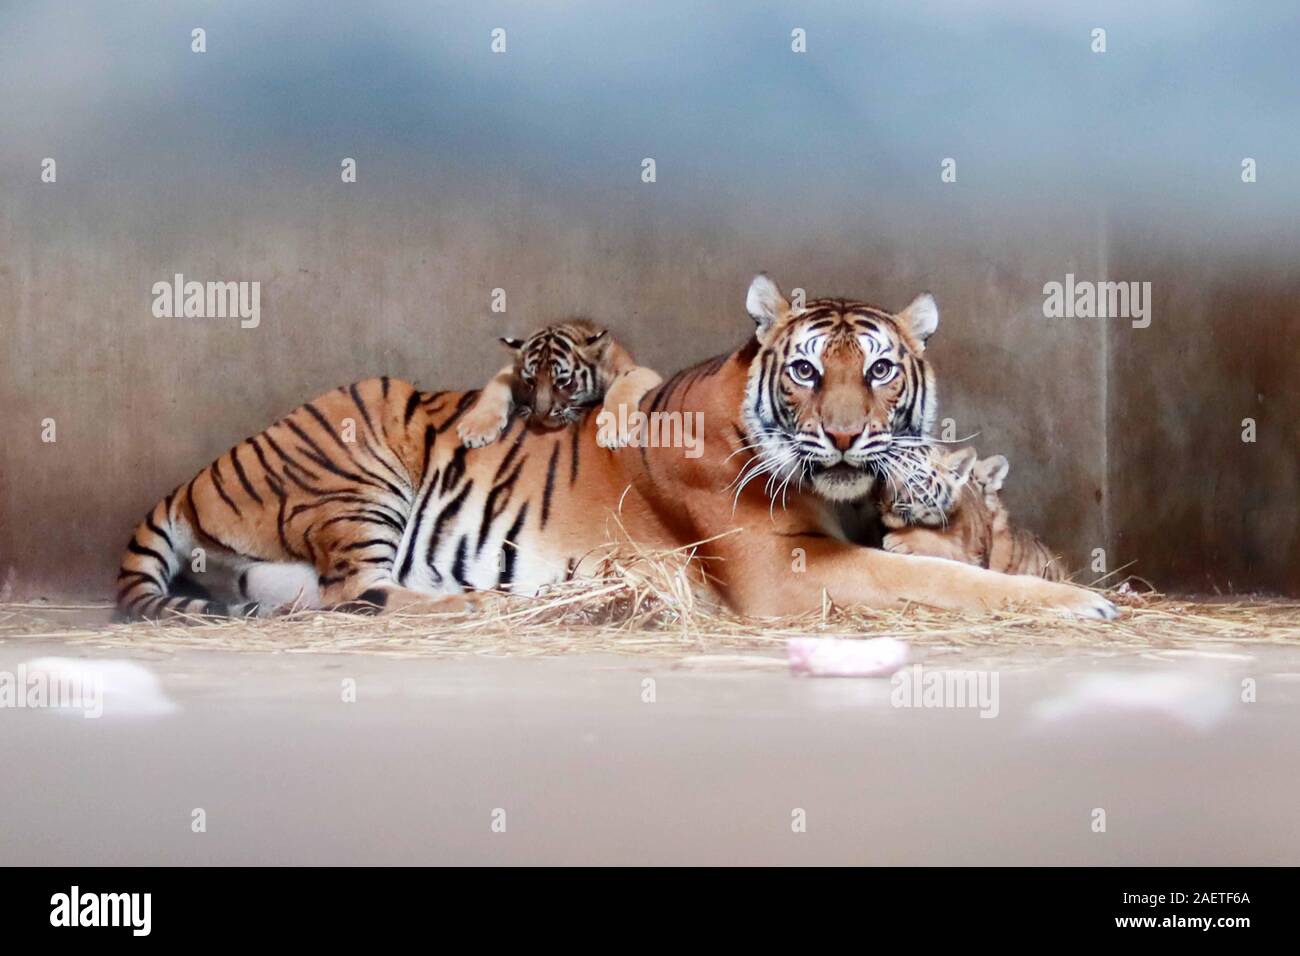 ADORABLE BABY TIGER CUB GLOSSY POSTER PICTURE BANNER bengal animals jungle  2290